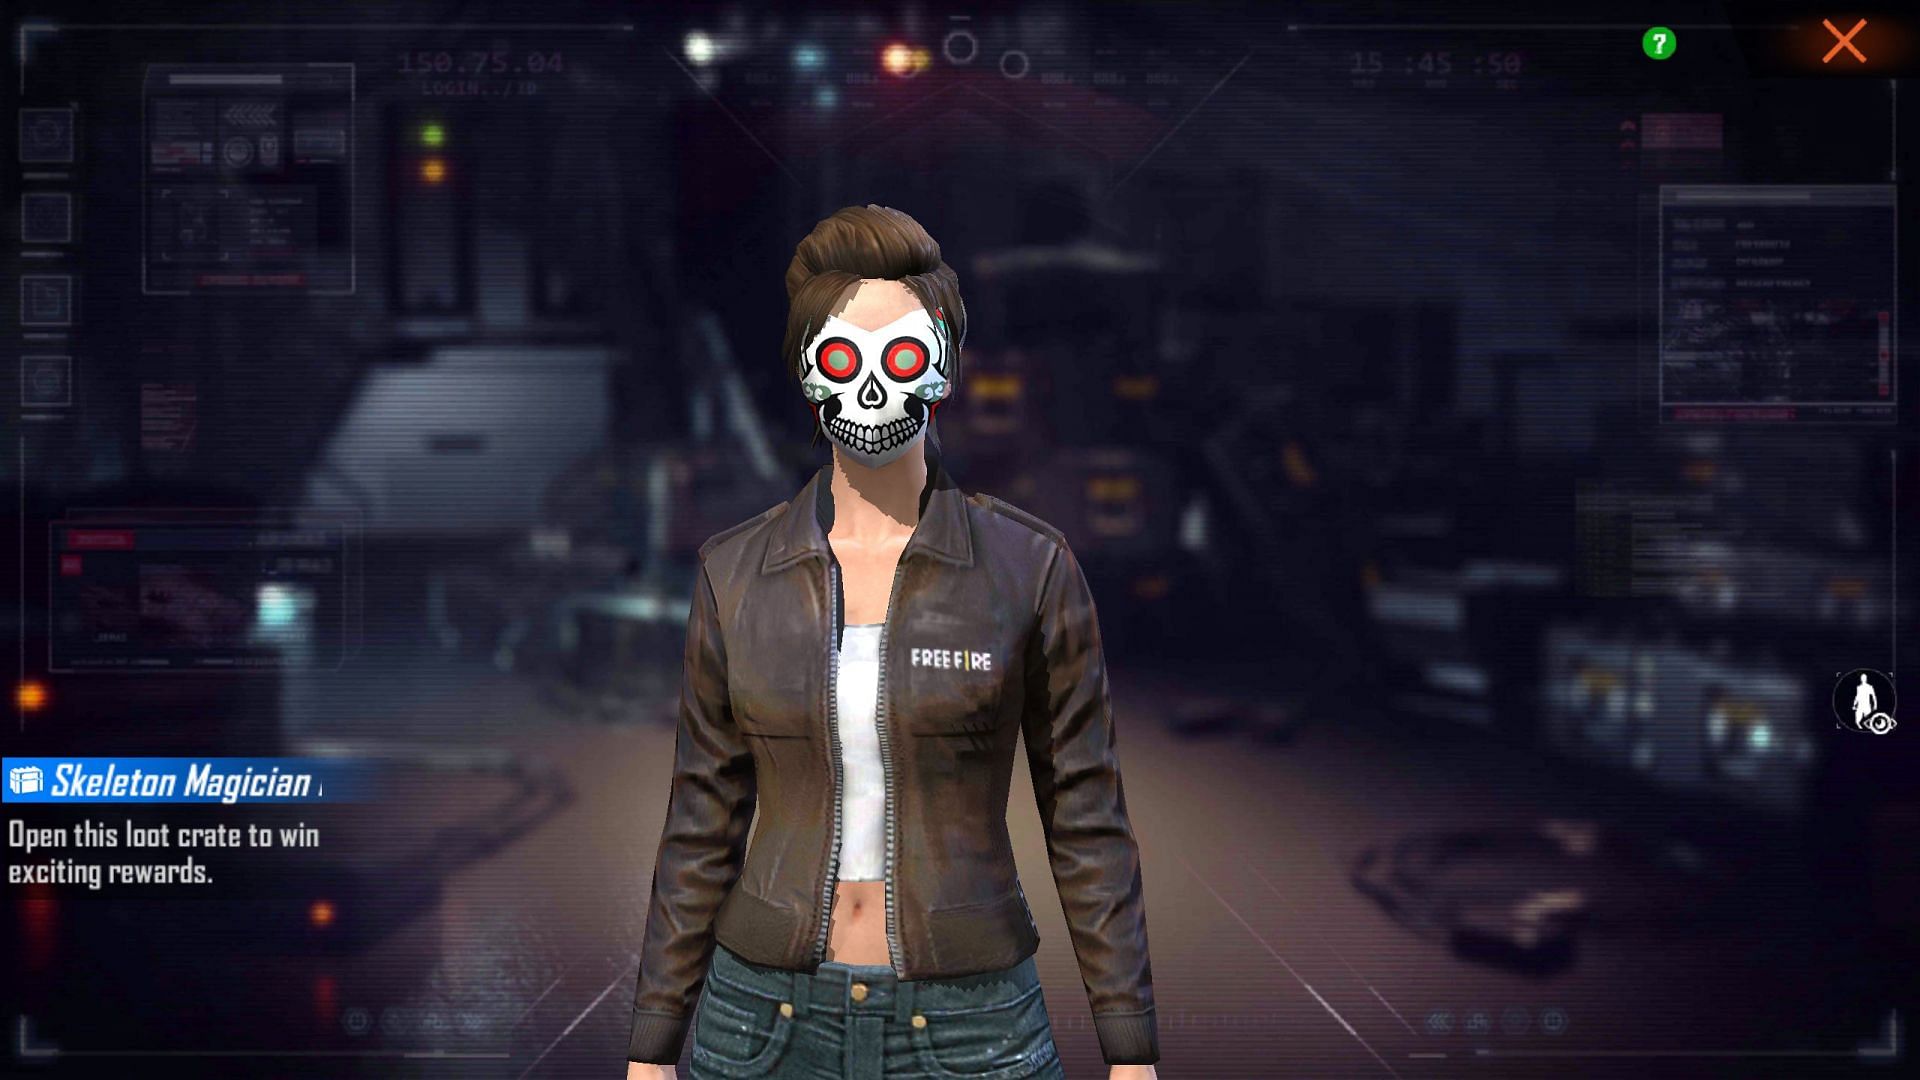 Skeleton Magician Mask Loot Crate in Free Fire (Image via Free Fire)